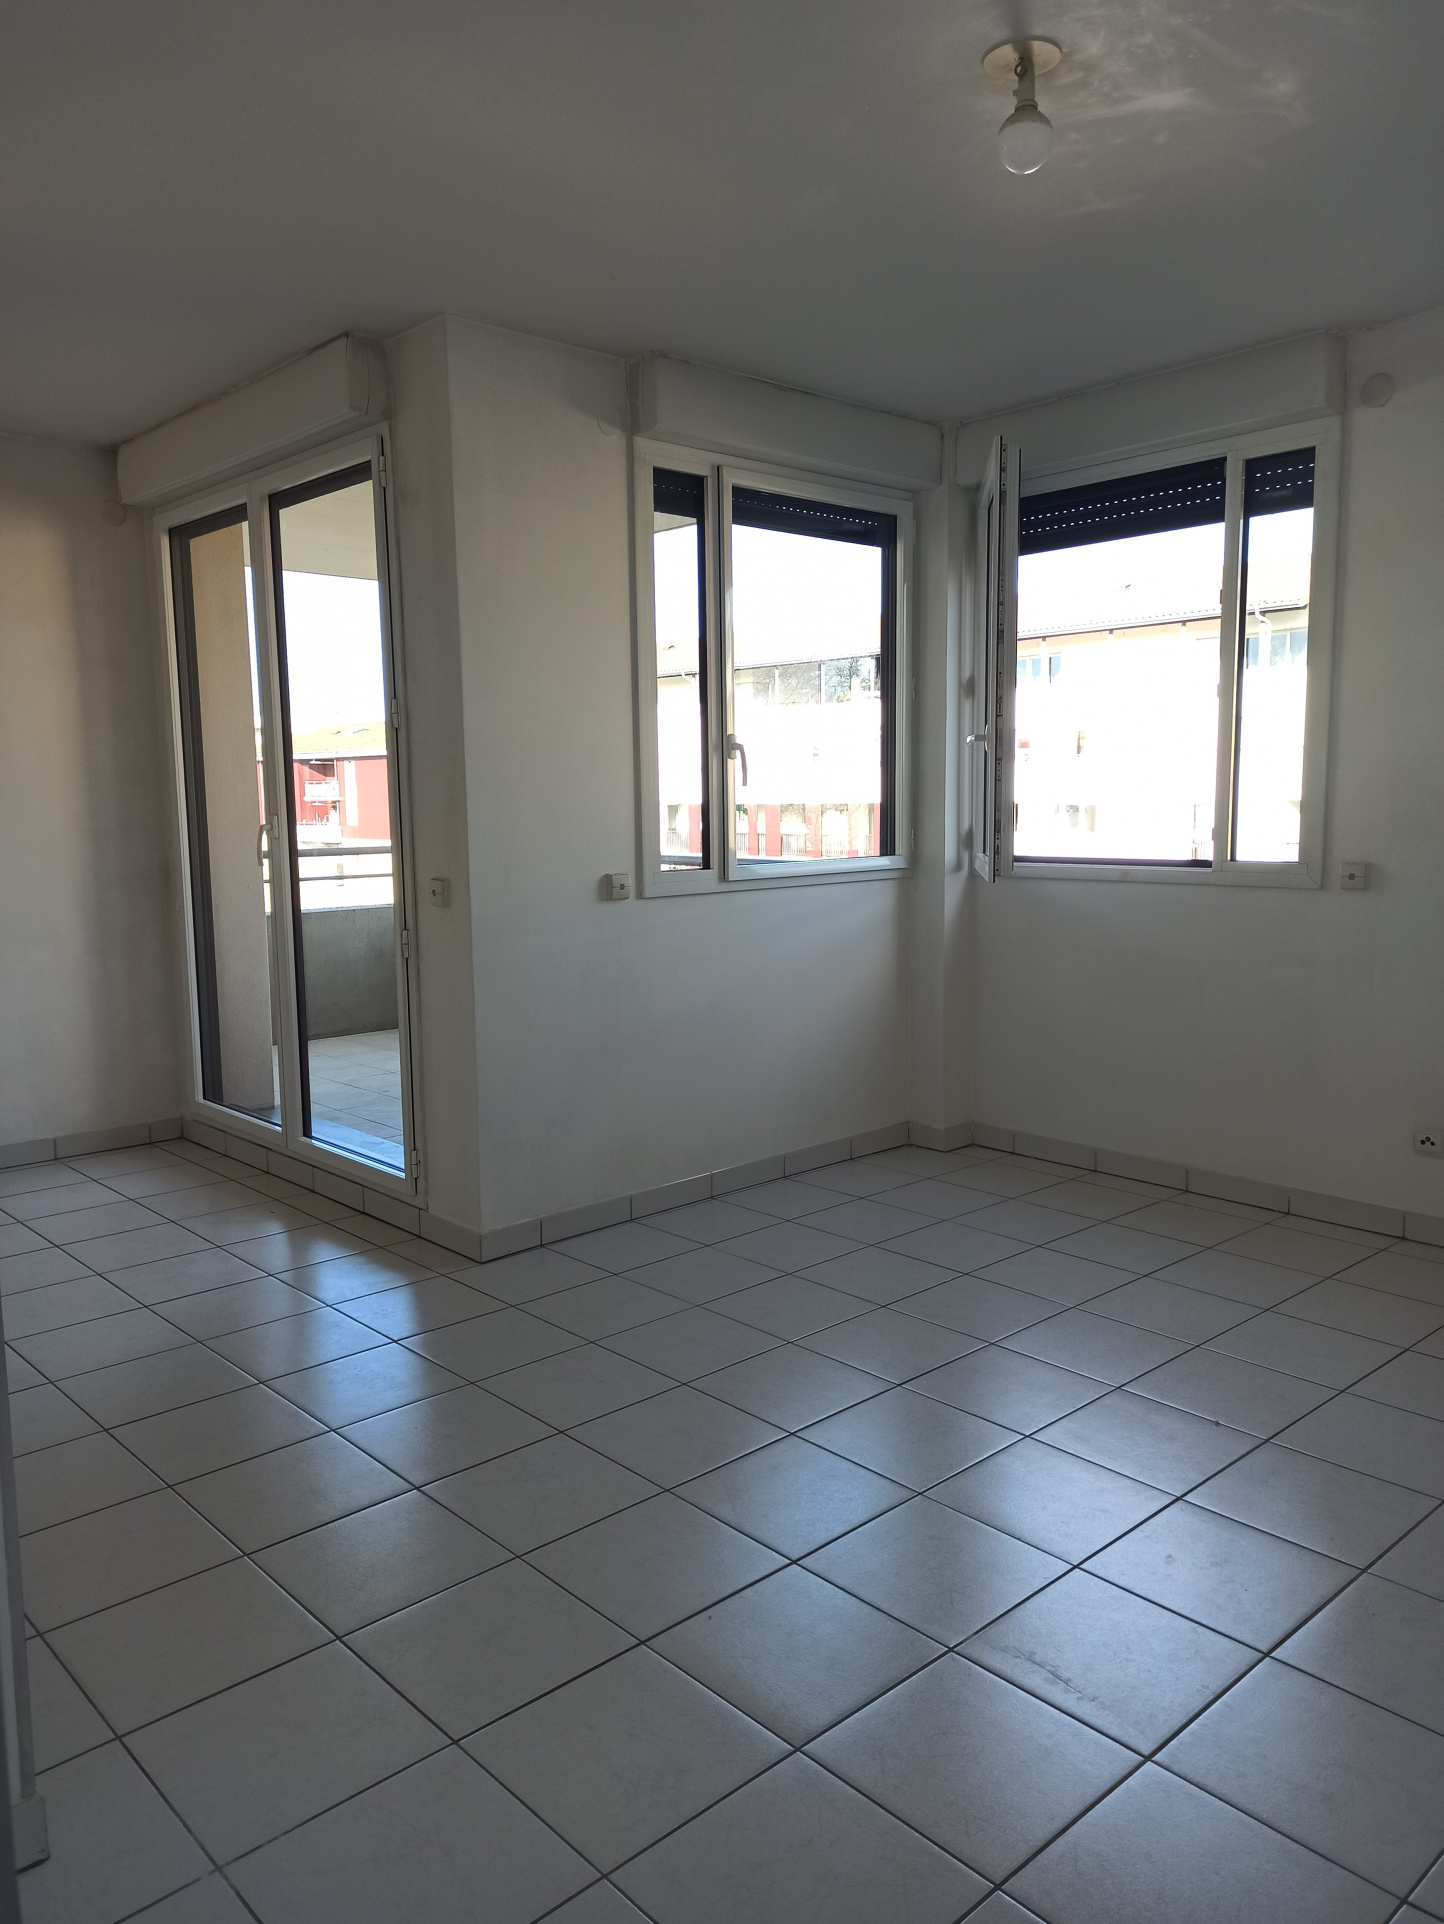 Toulouse,31200,3 Rooms Rooms,Appartement,1001